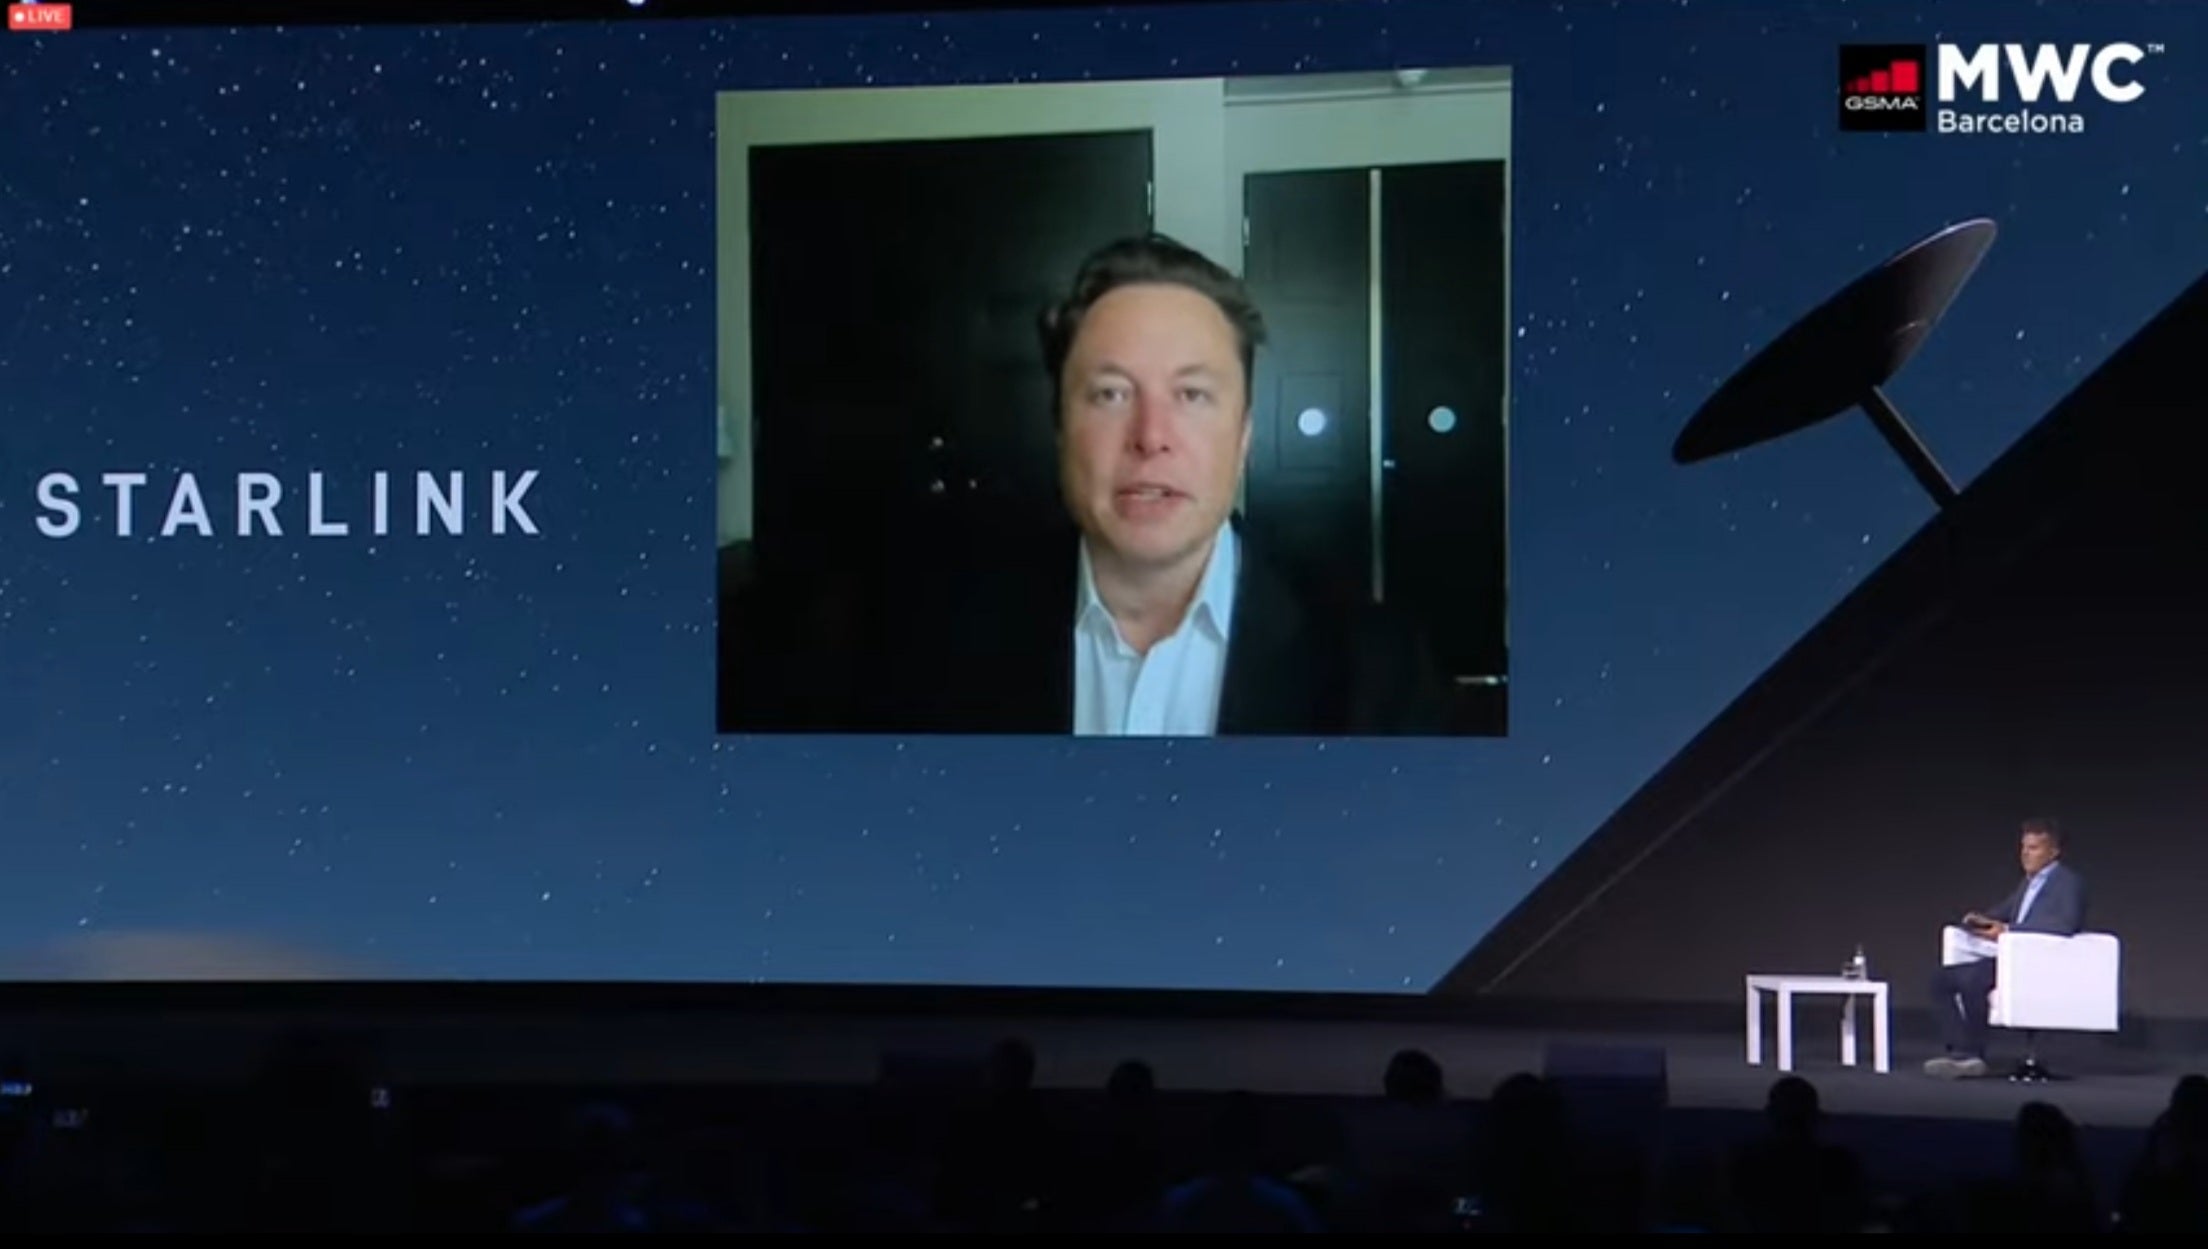 Elon Musk Discusses SpaceX Starlink Internet At The Mobile World Congress [VIDEO]